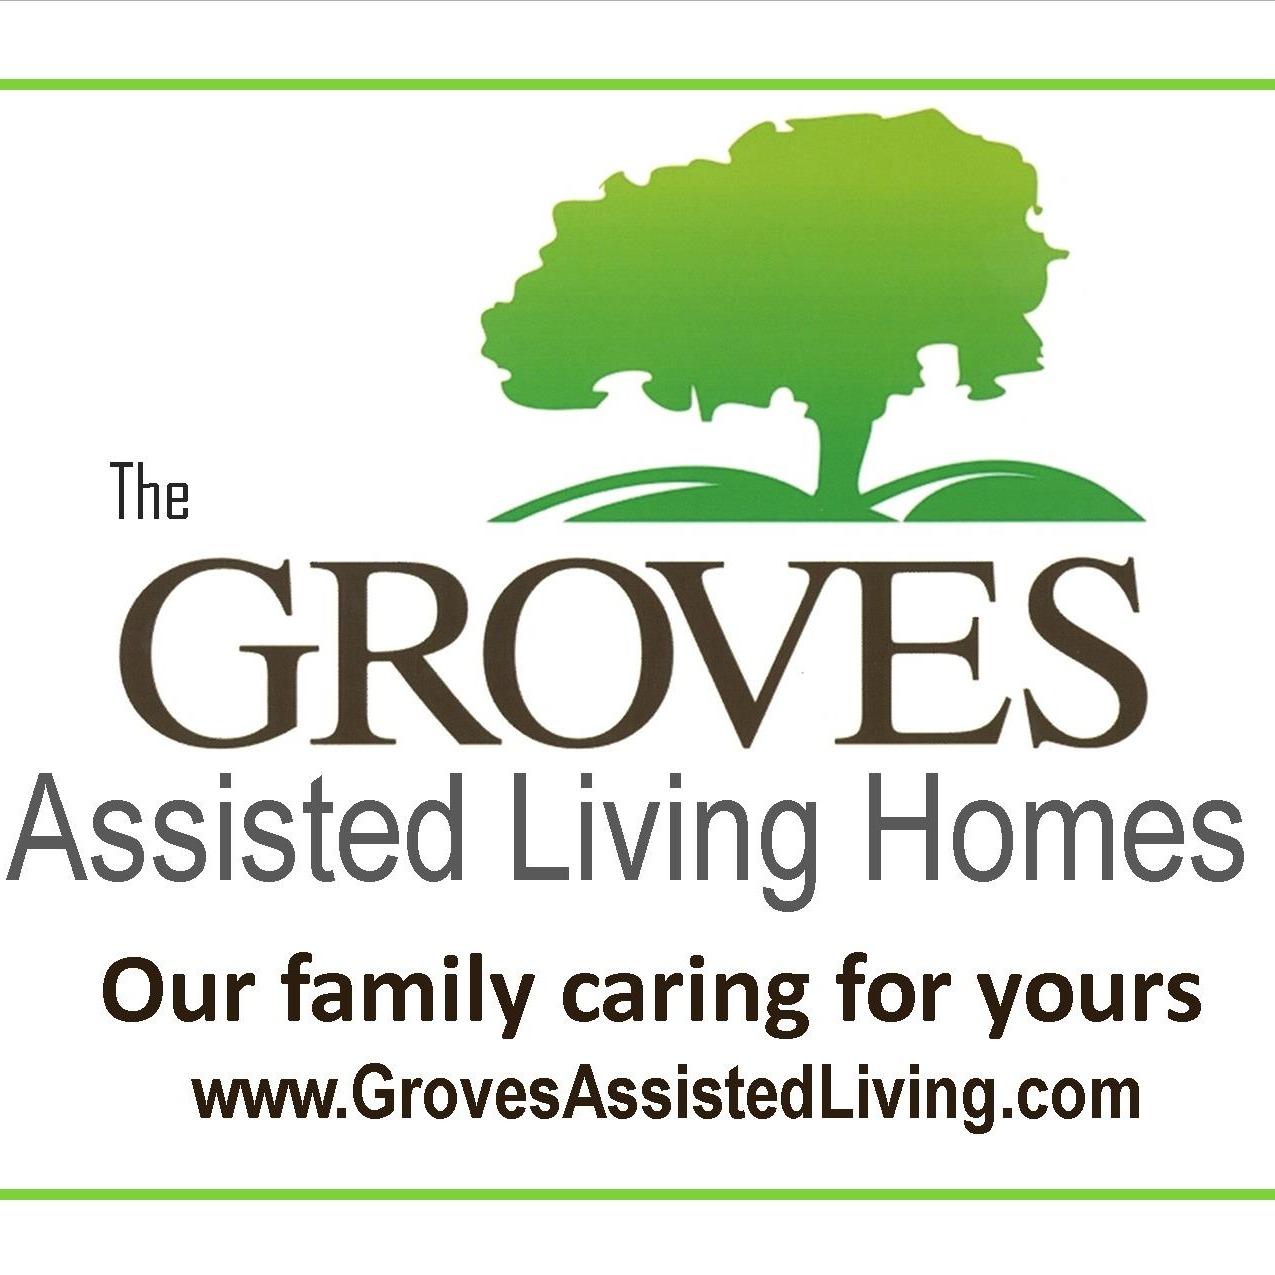 Groves Assisted Living Place - Spring Street